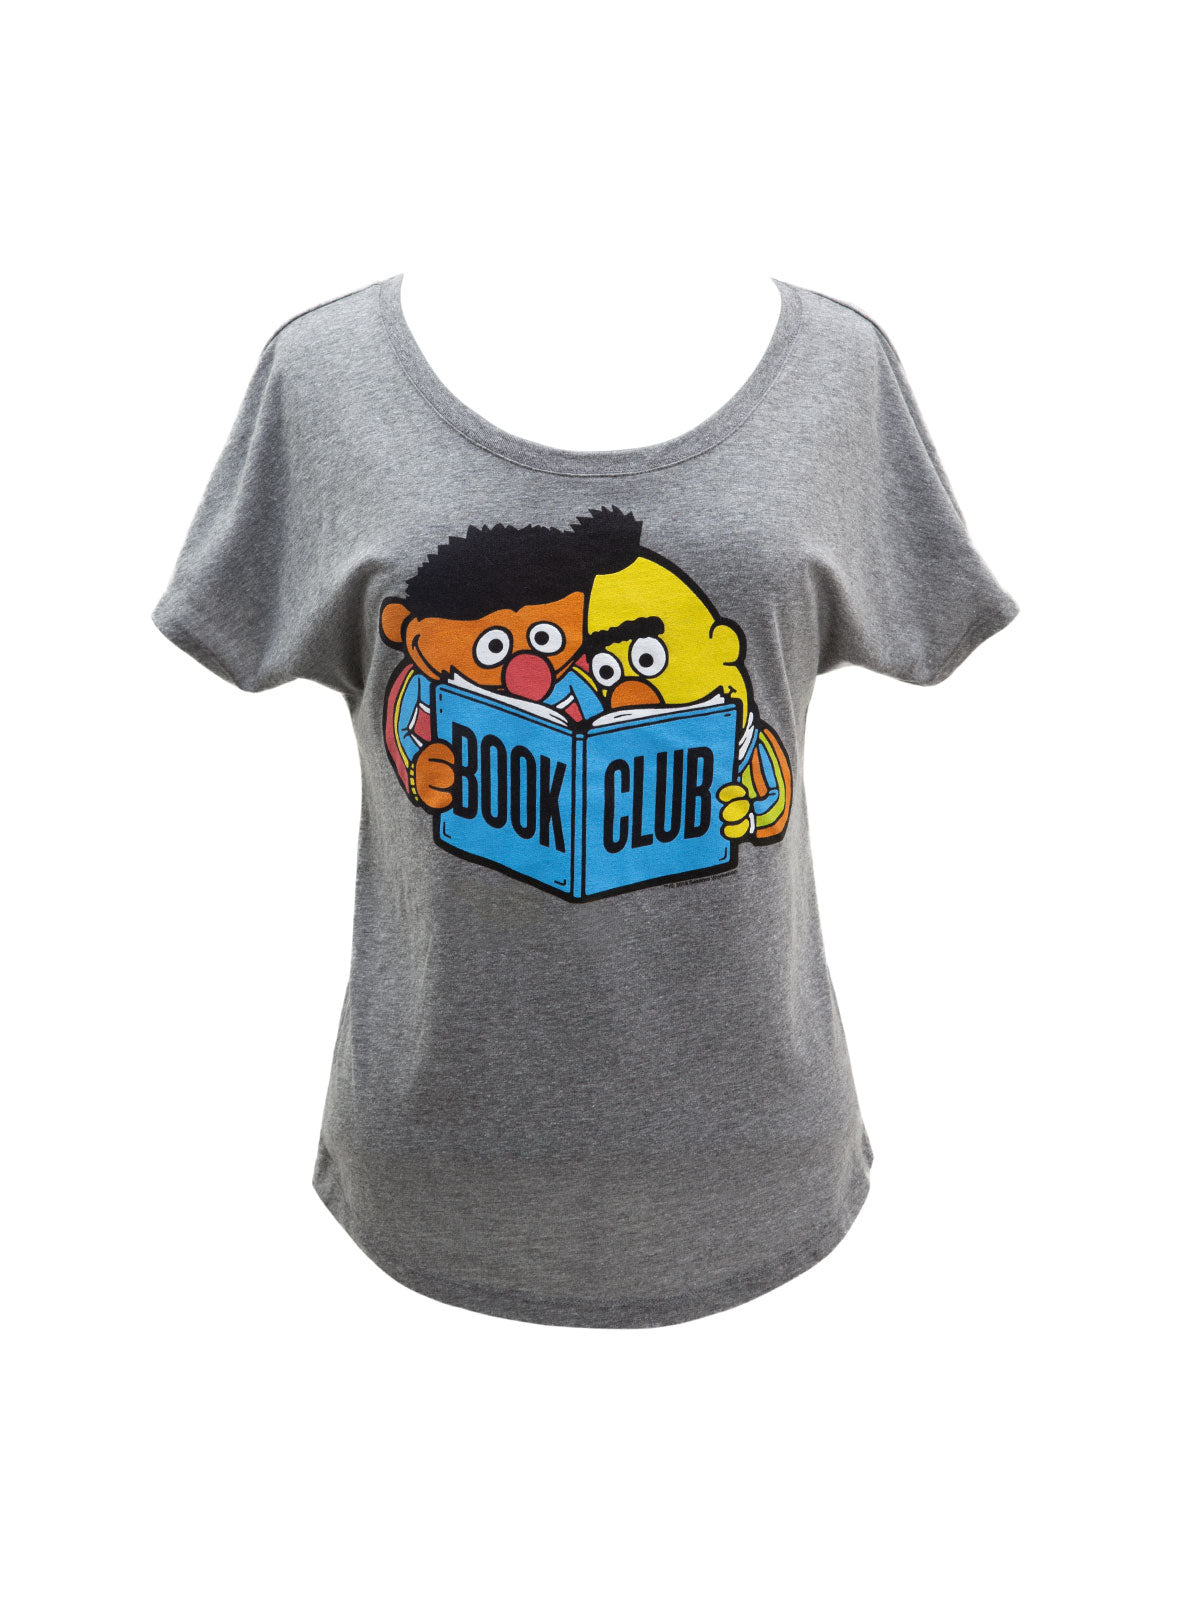 Bert And Ernie Book Club Womens Relaxed Fit T Shirt - 